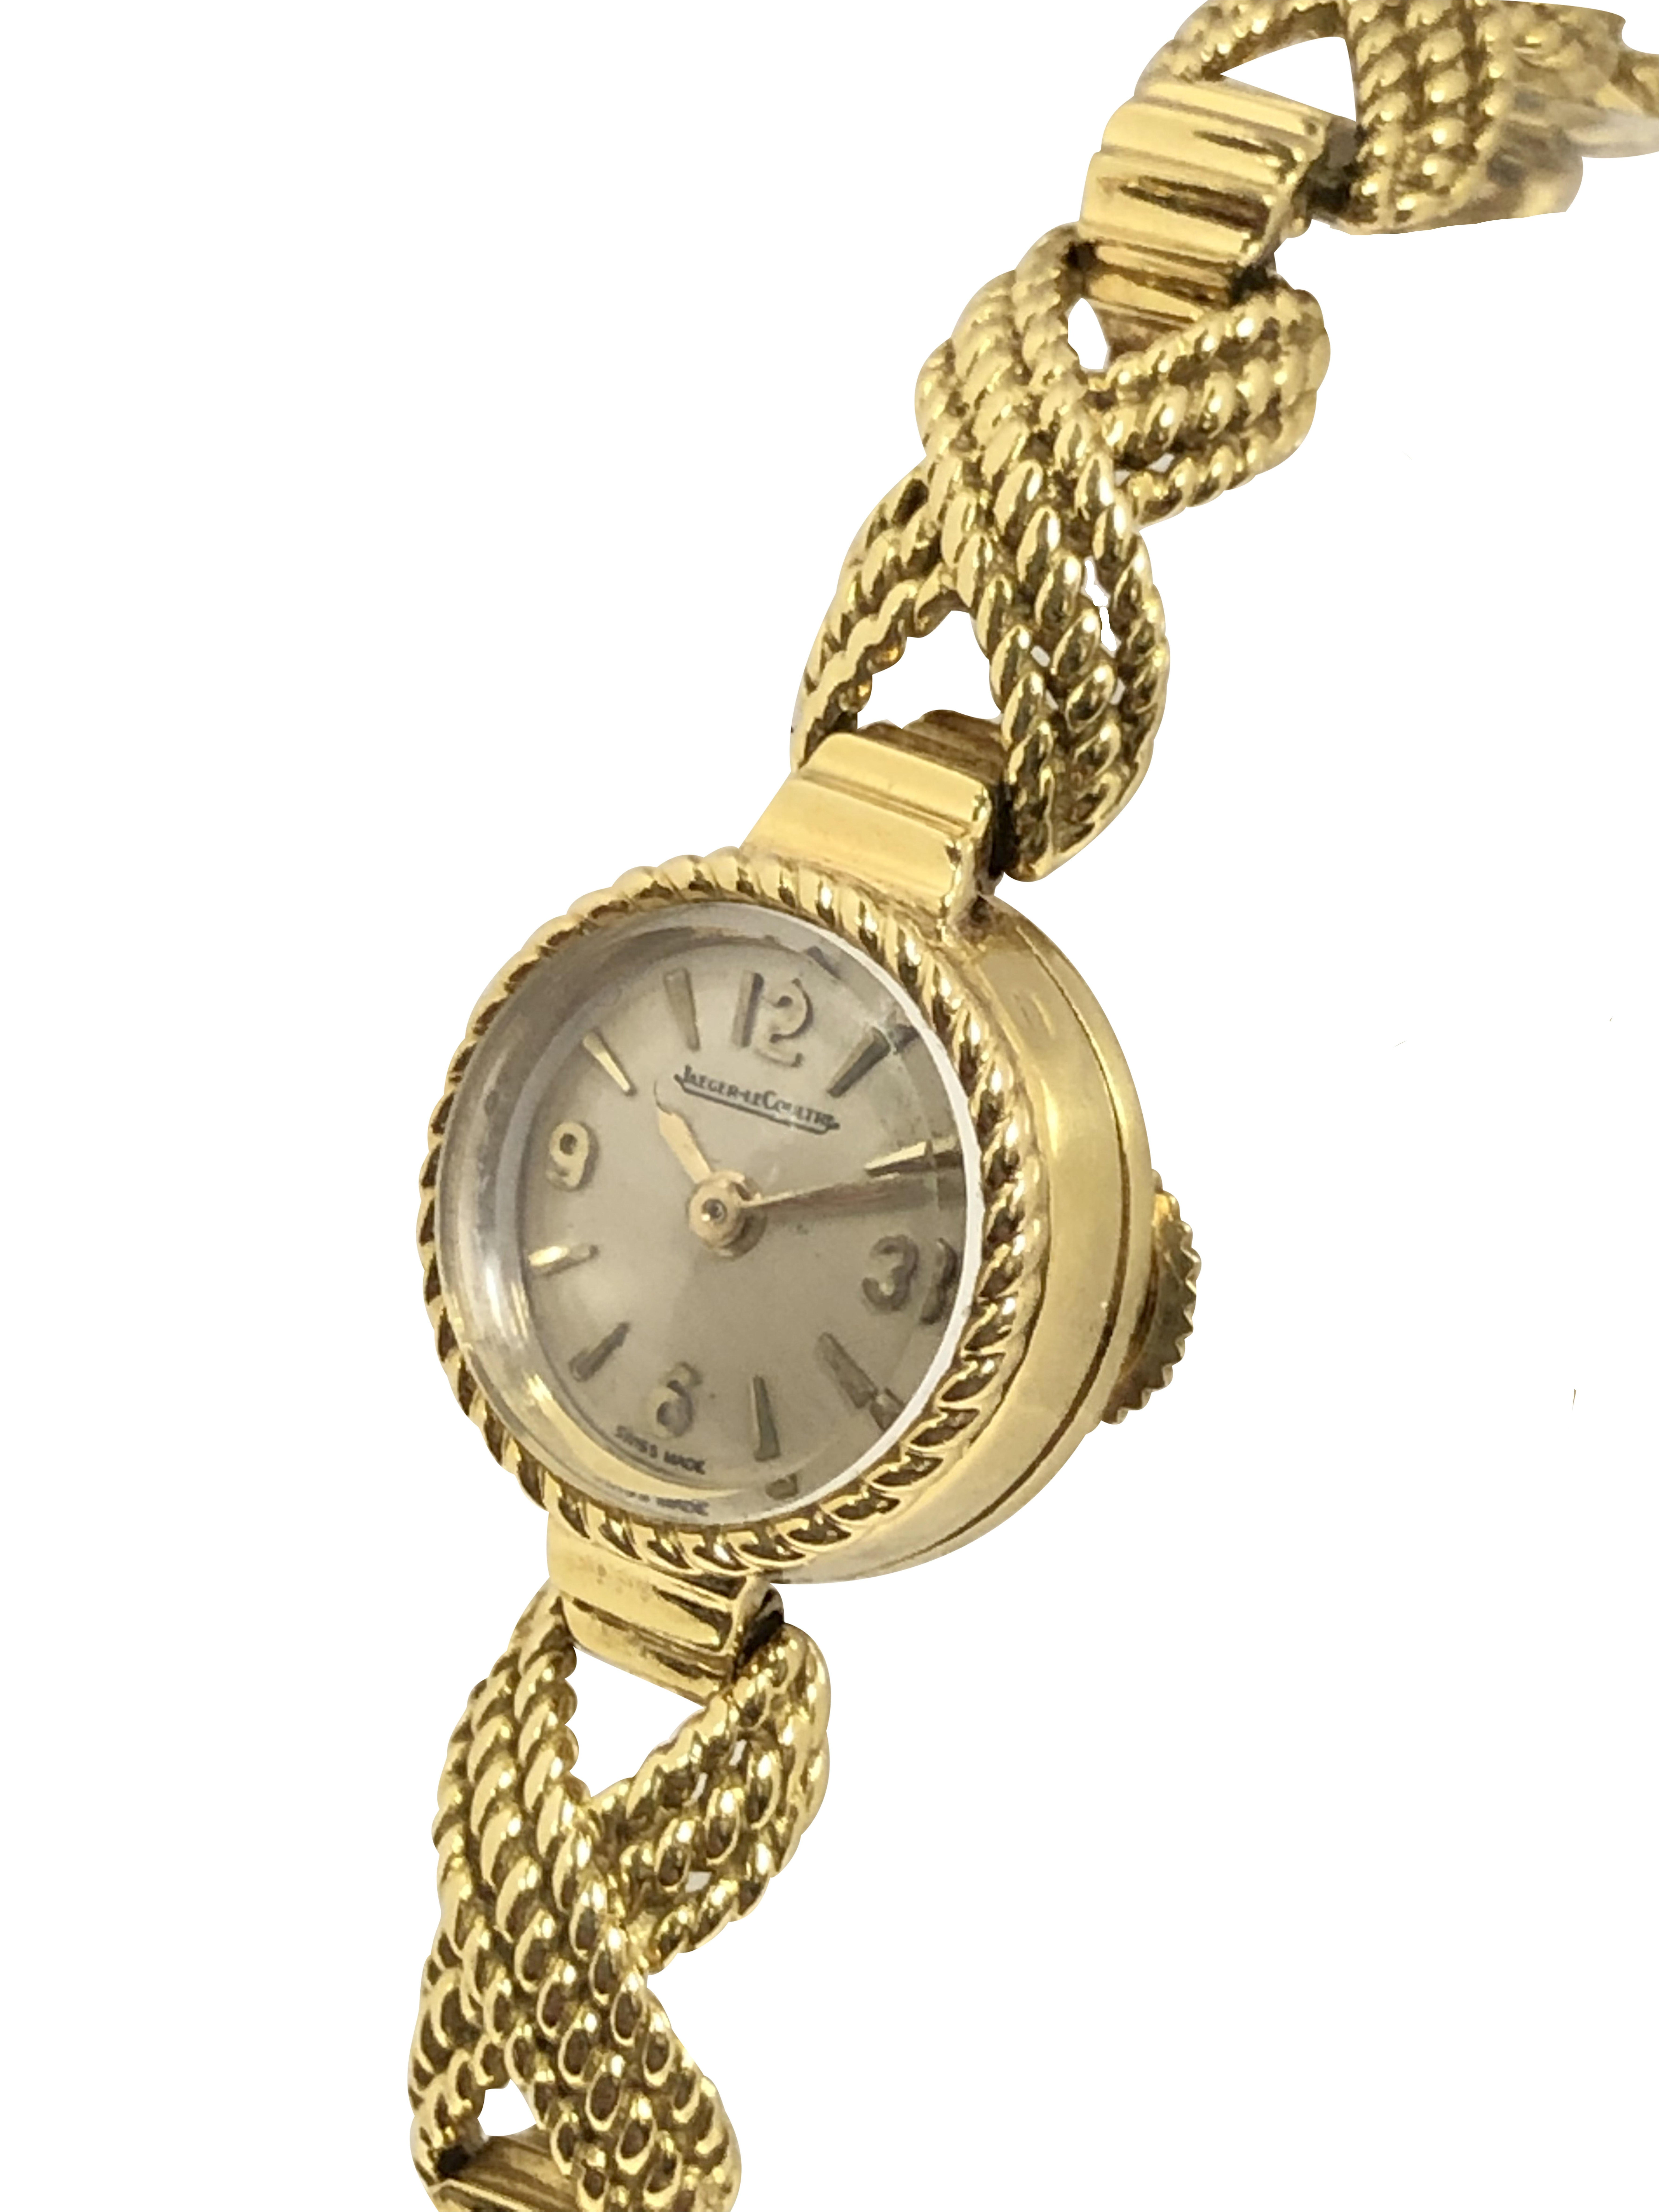 Circa 1950 Jaeger LeCoultre Ladies Bracelet Watch, 14 M.M. 18K Yellow Gold 2 Piece case with a Twist Rope Bezel. 17 jewel Mechanical, Manual wind movement with Back wind and set feature. Silver Satin dial with raised Gold markers. 1/4 inch wide 18K